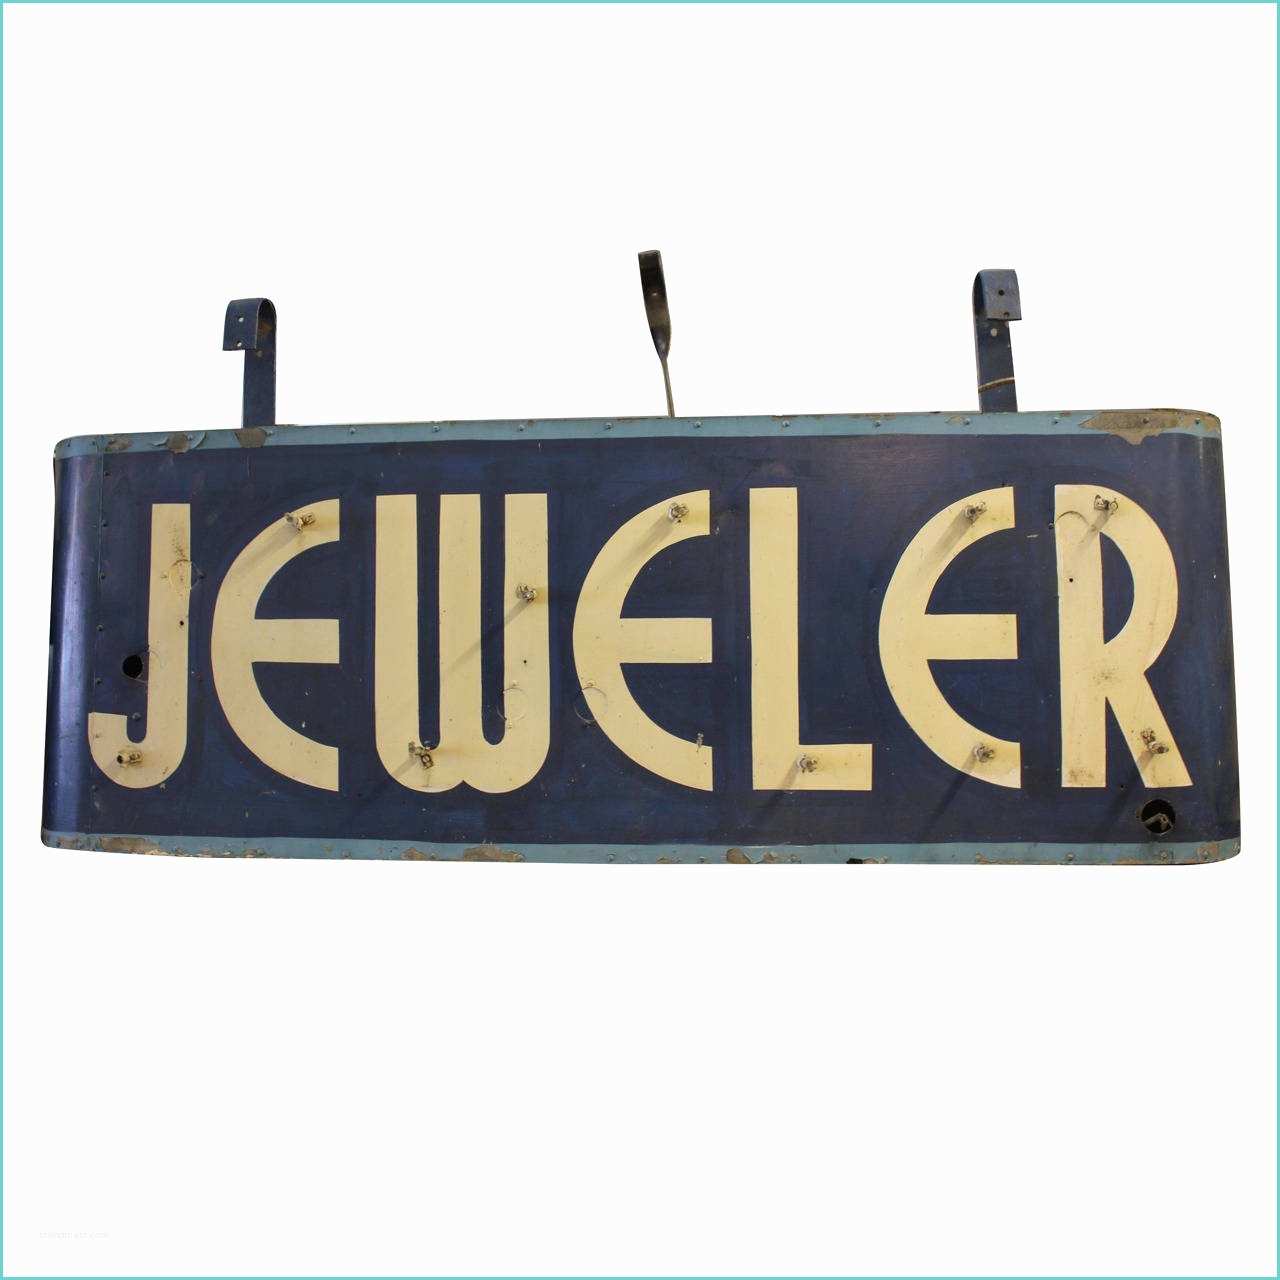 Art Deco Neon Sign Art Deco Double Sided Jeweler Sign at 1stdibs